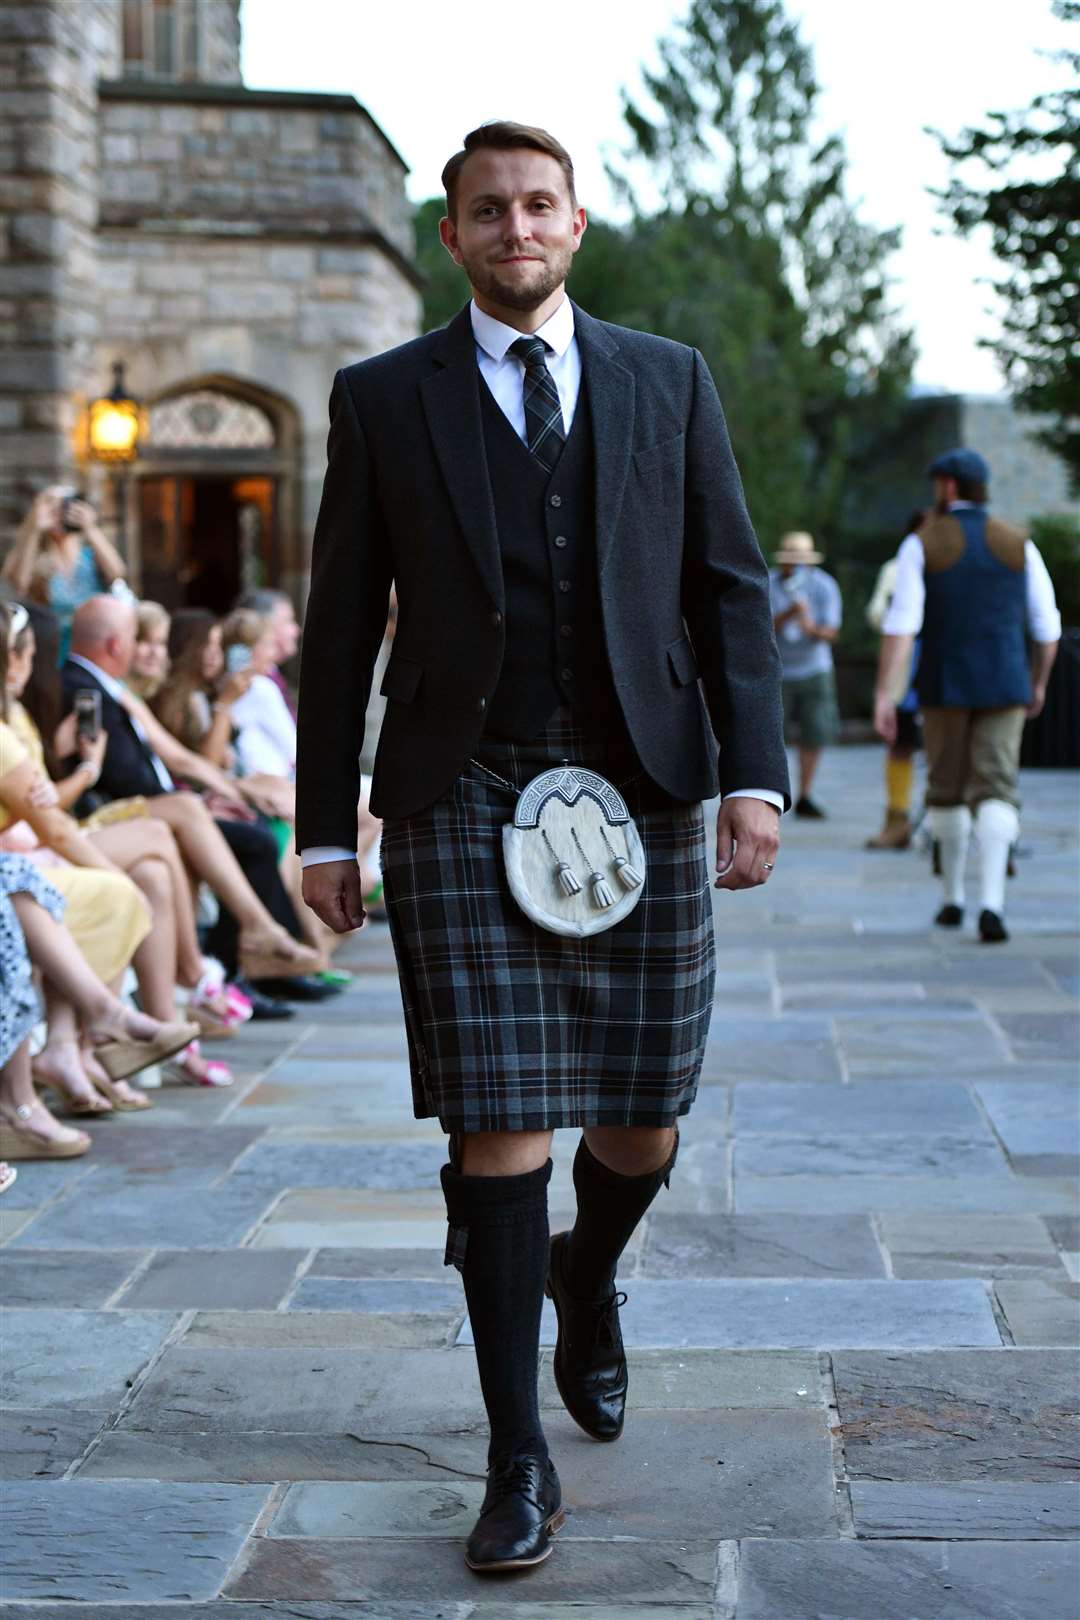 Adam Gray on the runway at Dressed to Kilt sporting a Glen Orchy tweed jacket and waistcoat in Oban Mist tartan supplied by MacGregor and MacDuff.